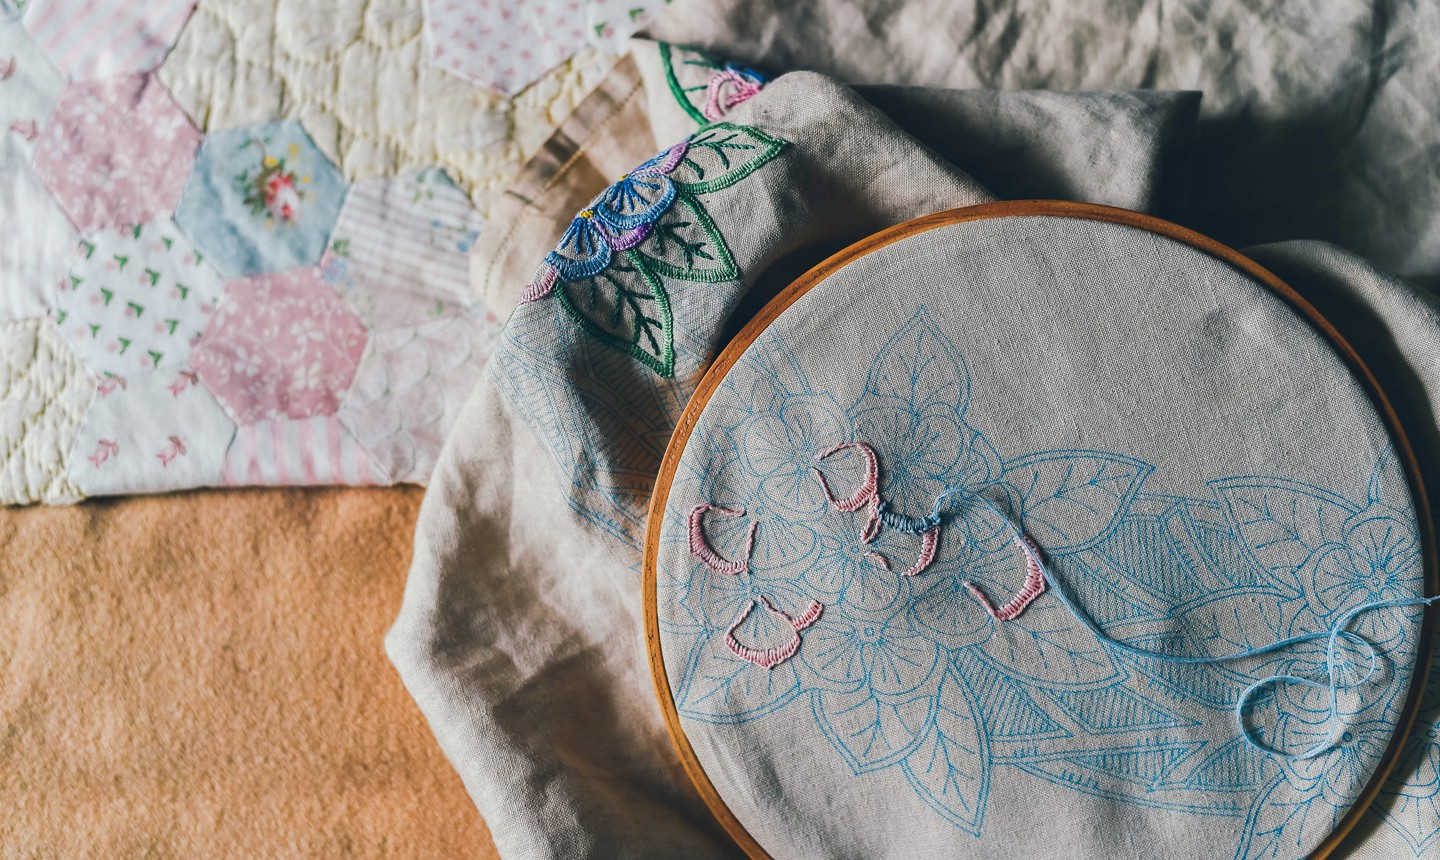 Embroidery Patterns Online 5 Simple Ways To Transfer Embroidery Designs